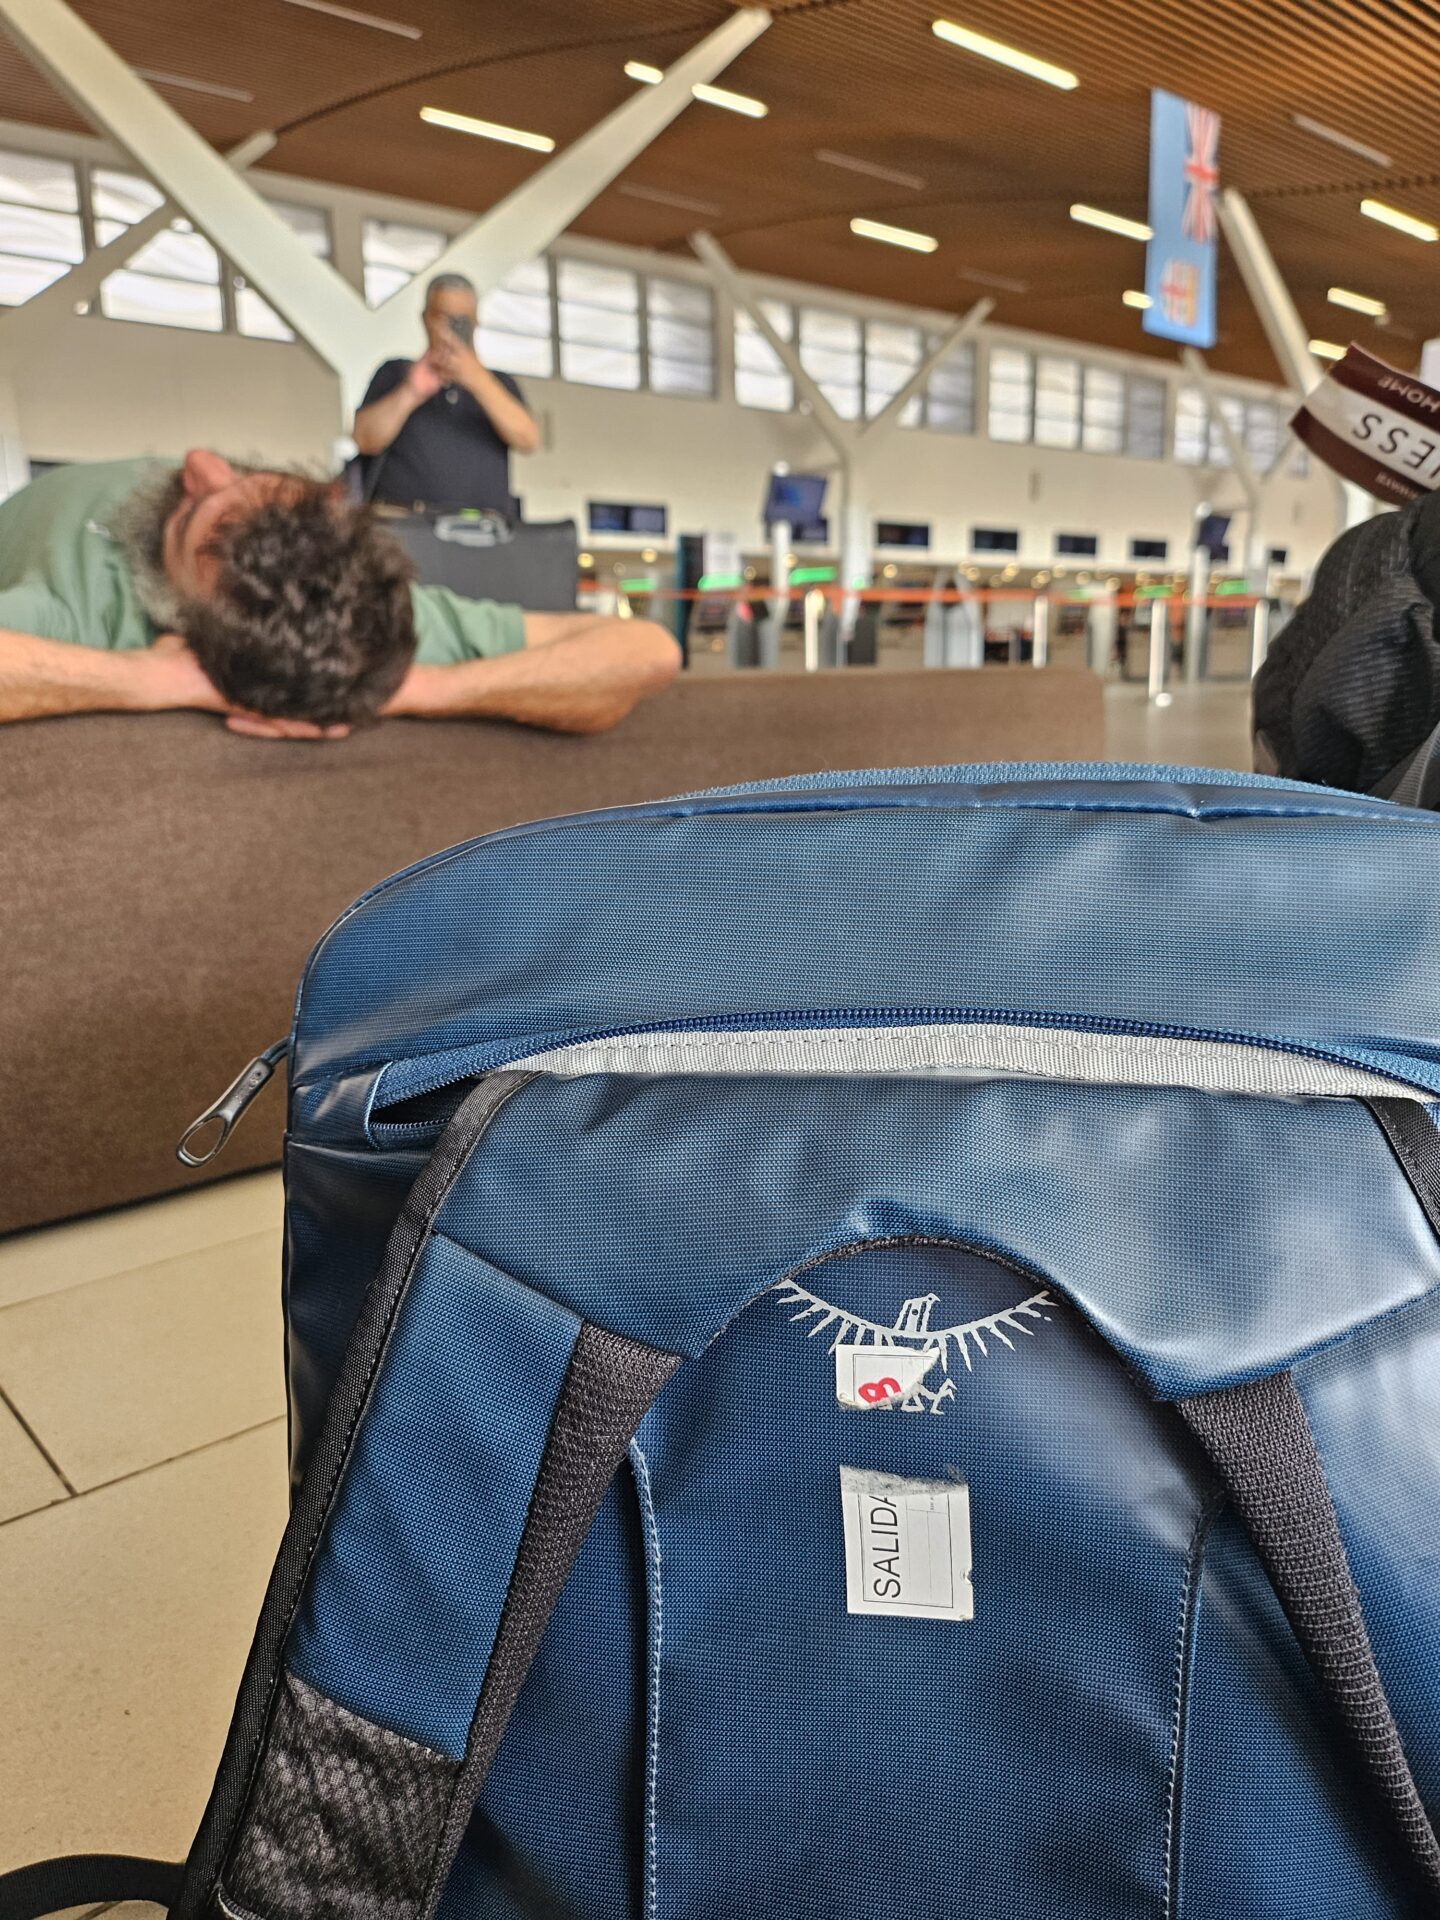 a man sleeping on a couch in an airport